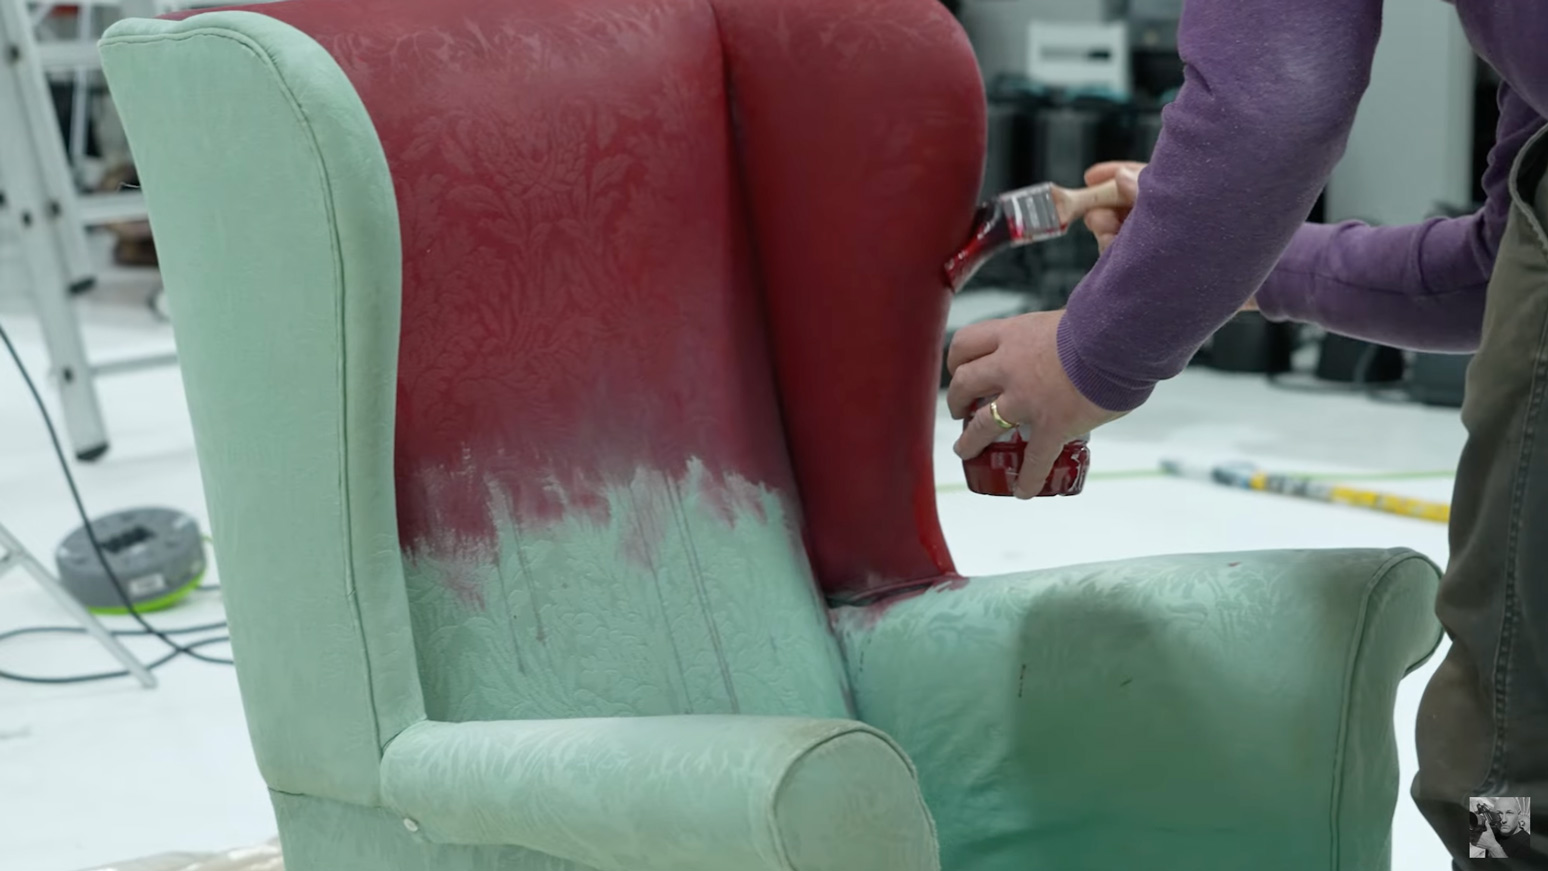 Painting the chair